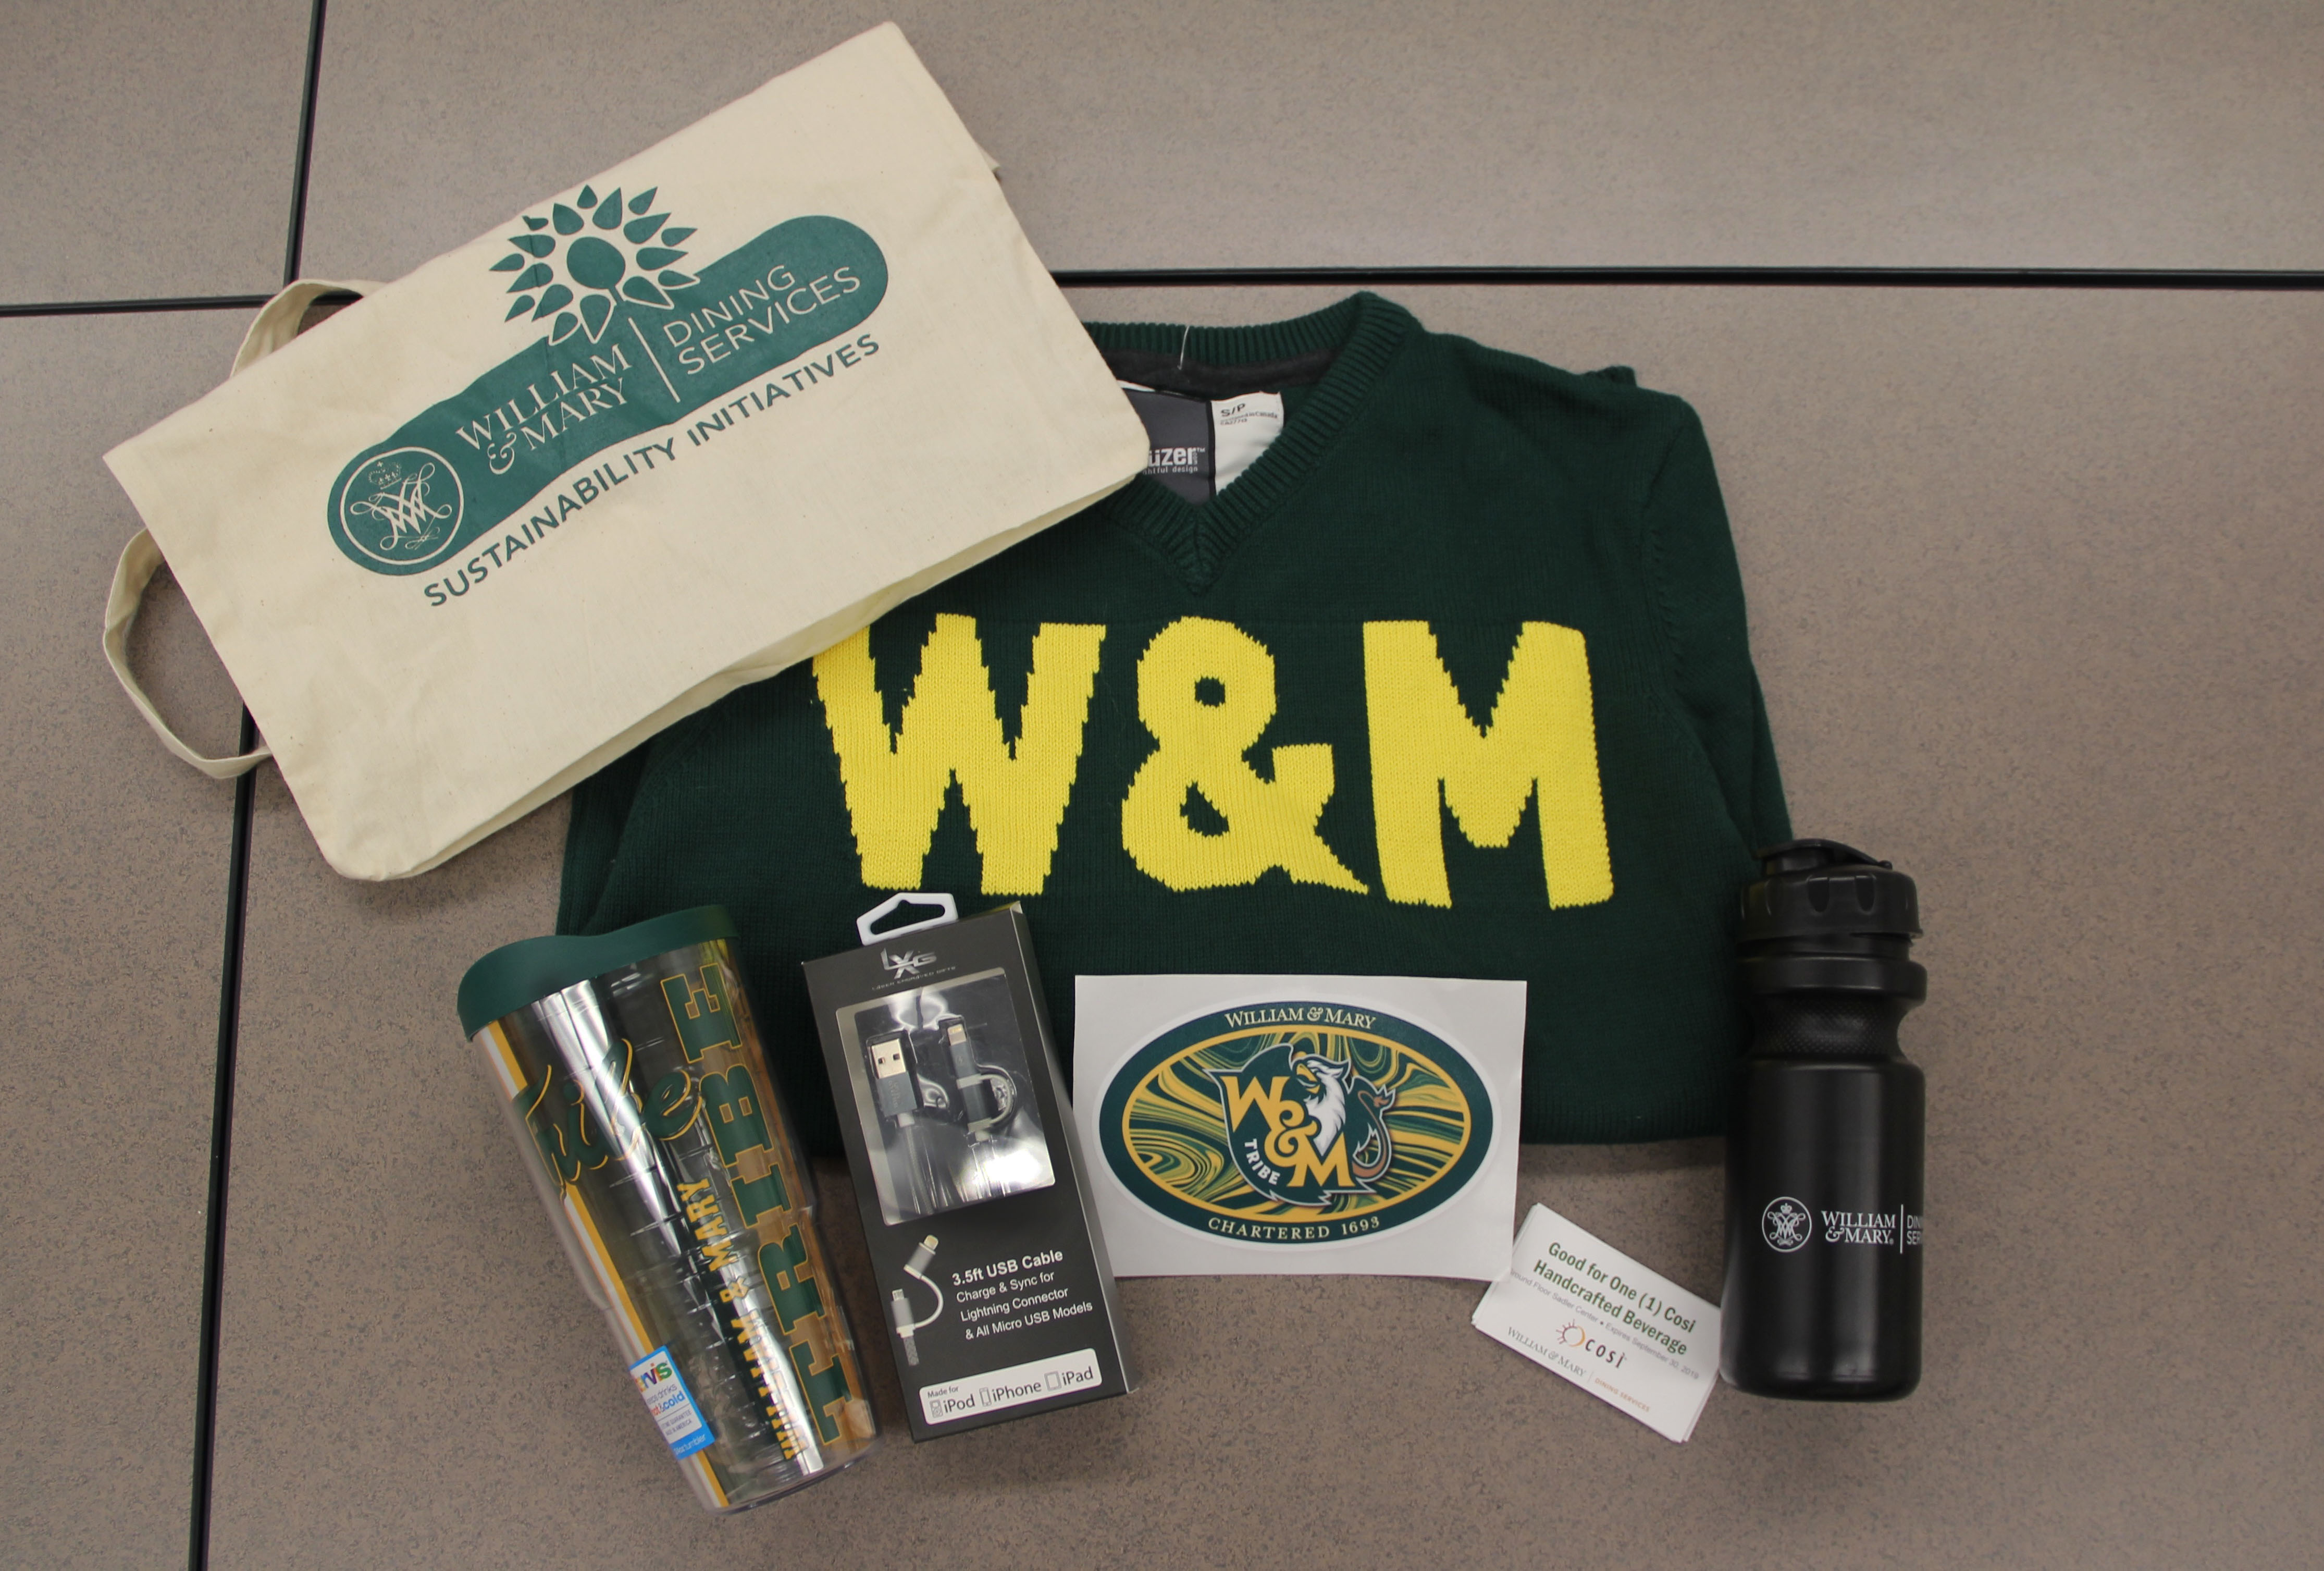 Prizes for early enrollment in Duo are pictured above.  They include W&amp;M apparel, cups, a tote bag, USB charging cord, a decal, and drink coupons.